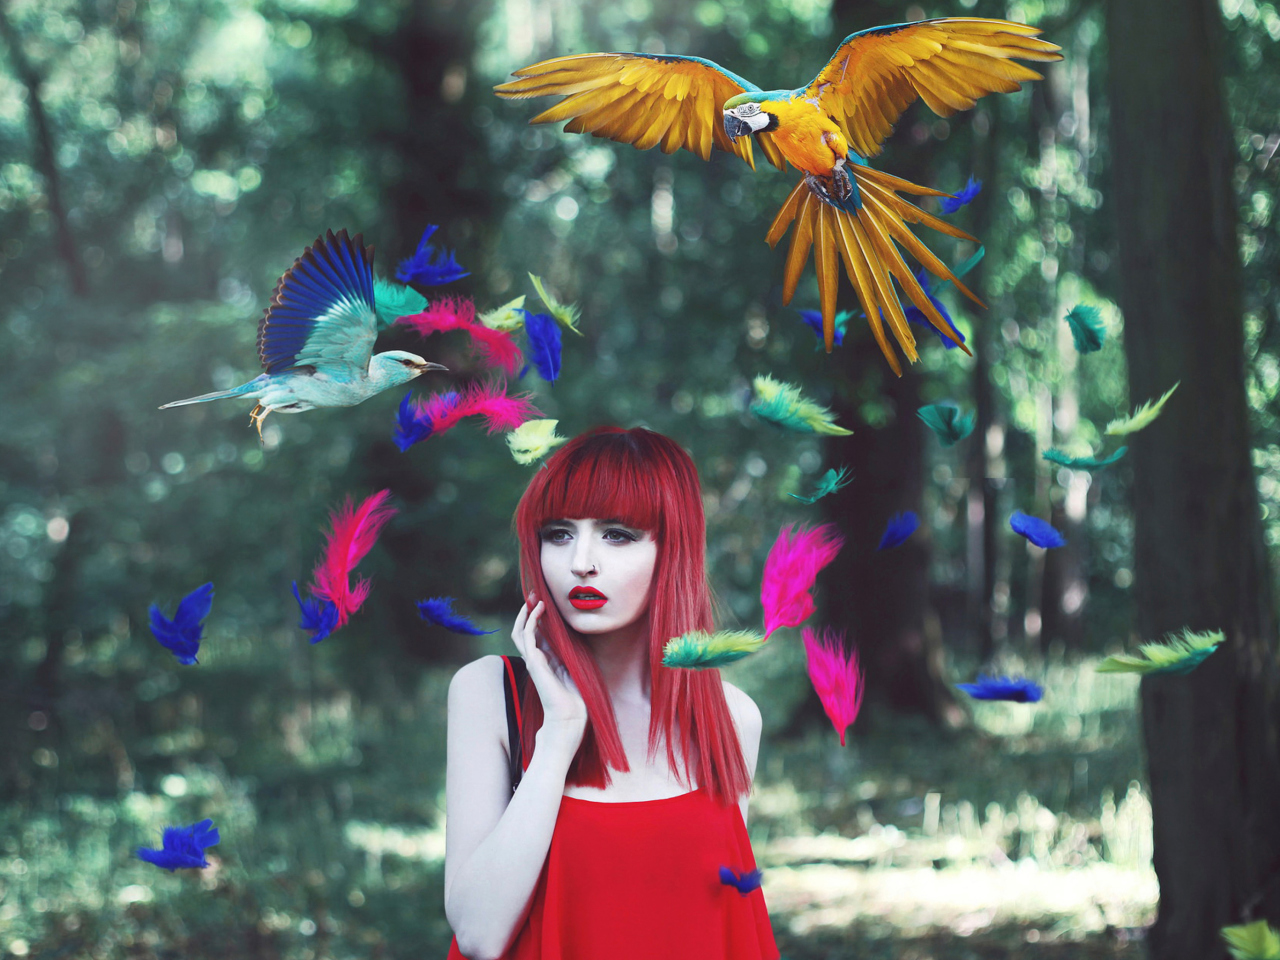 Girl, Birds And Feathers wallpaper 1280x960